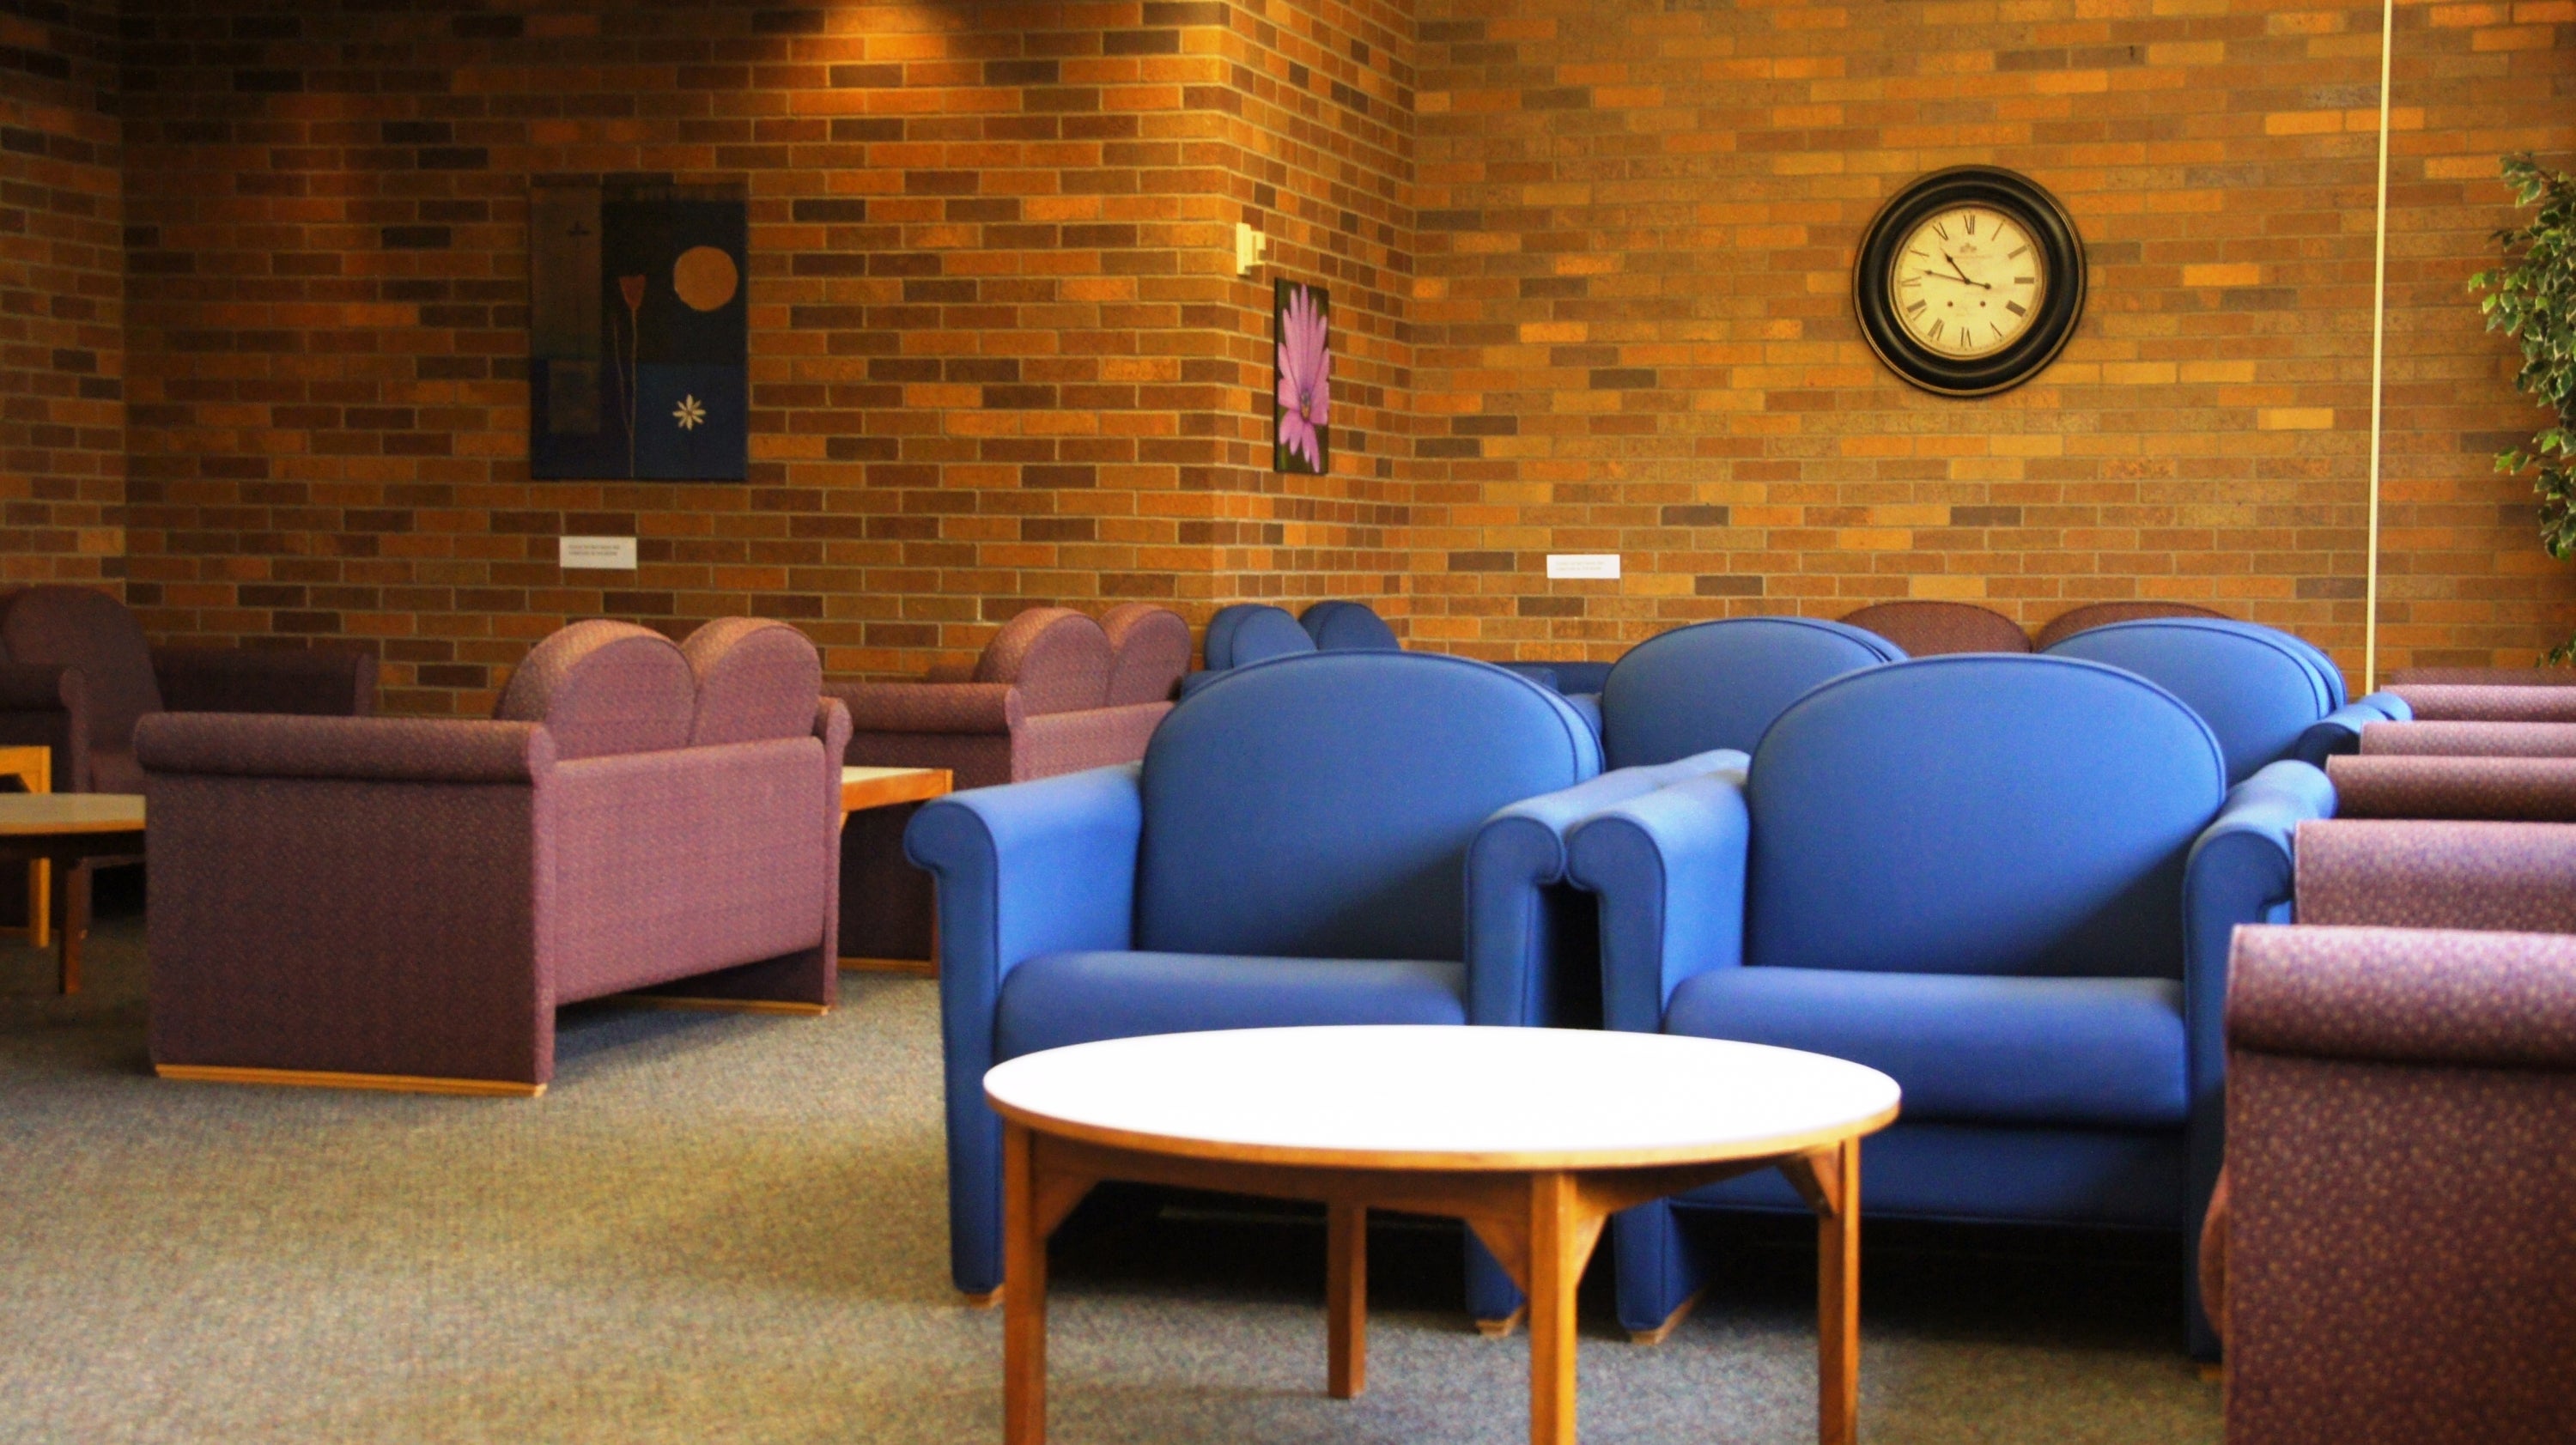 The lounge in the PAS building